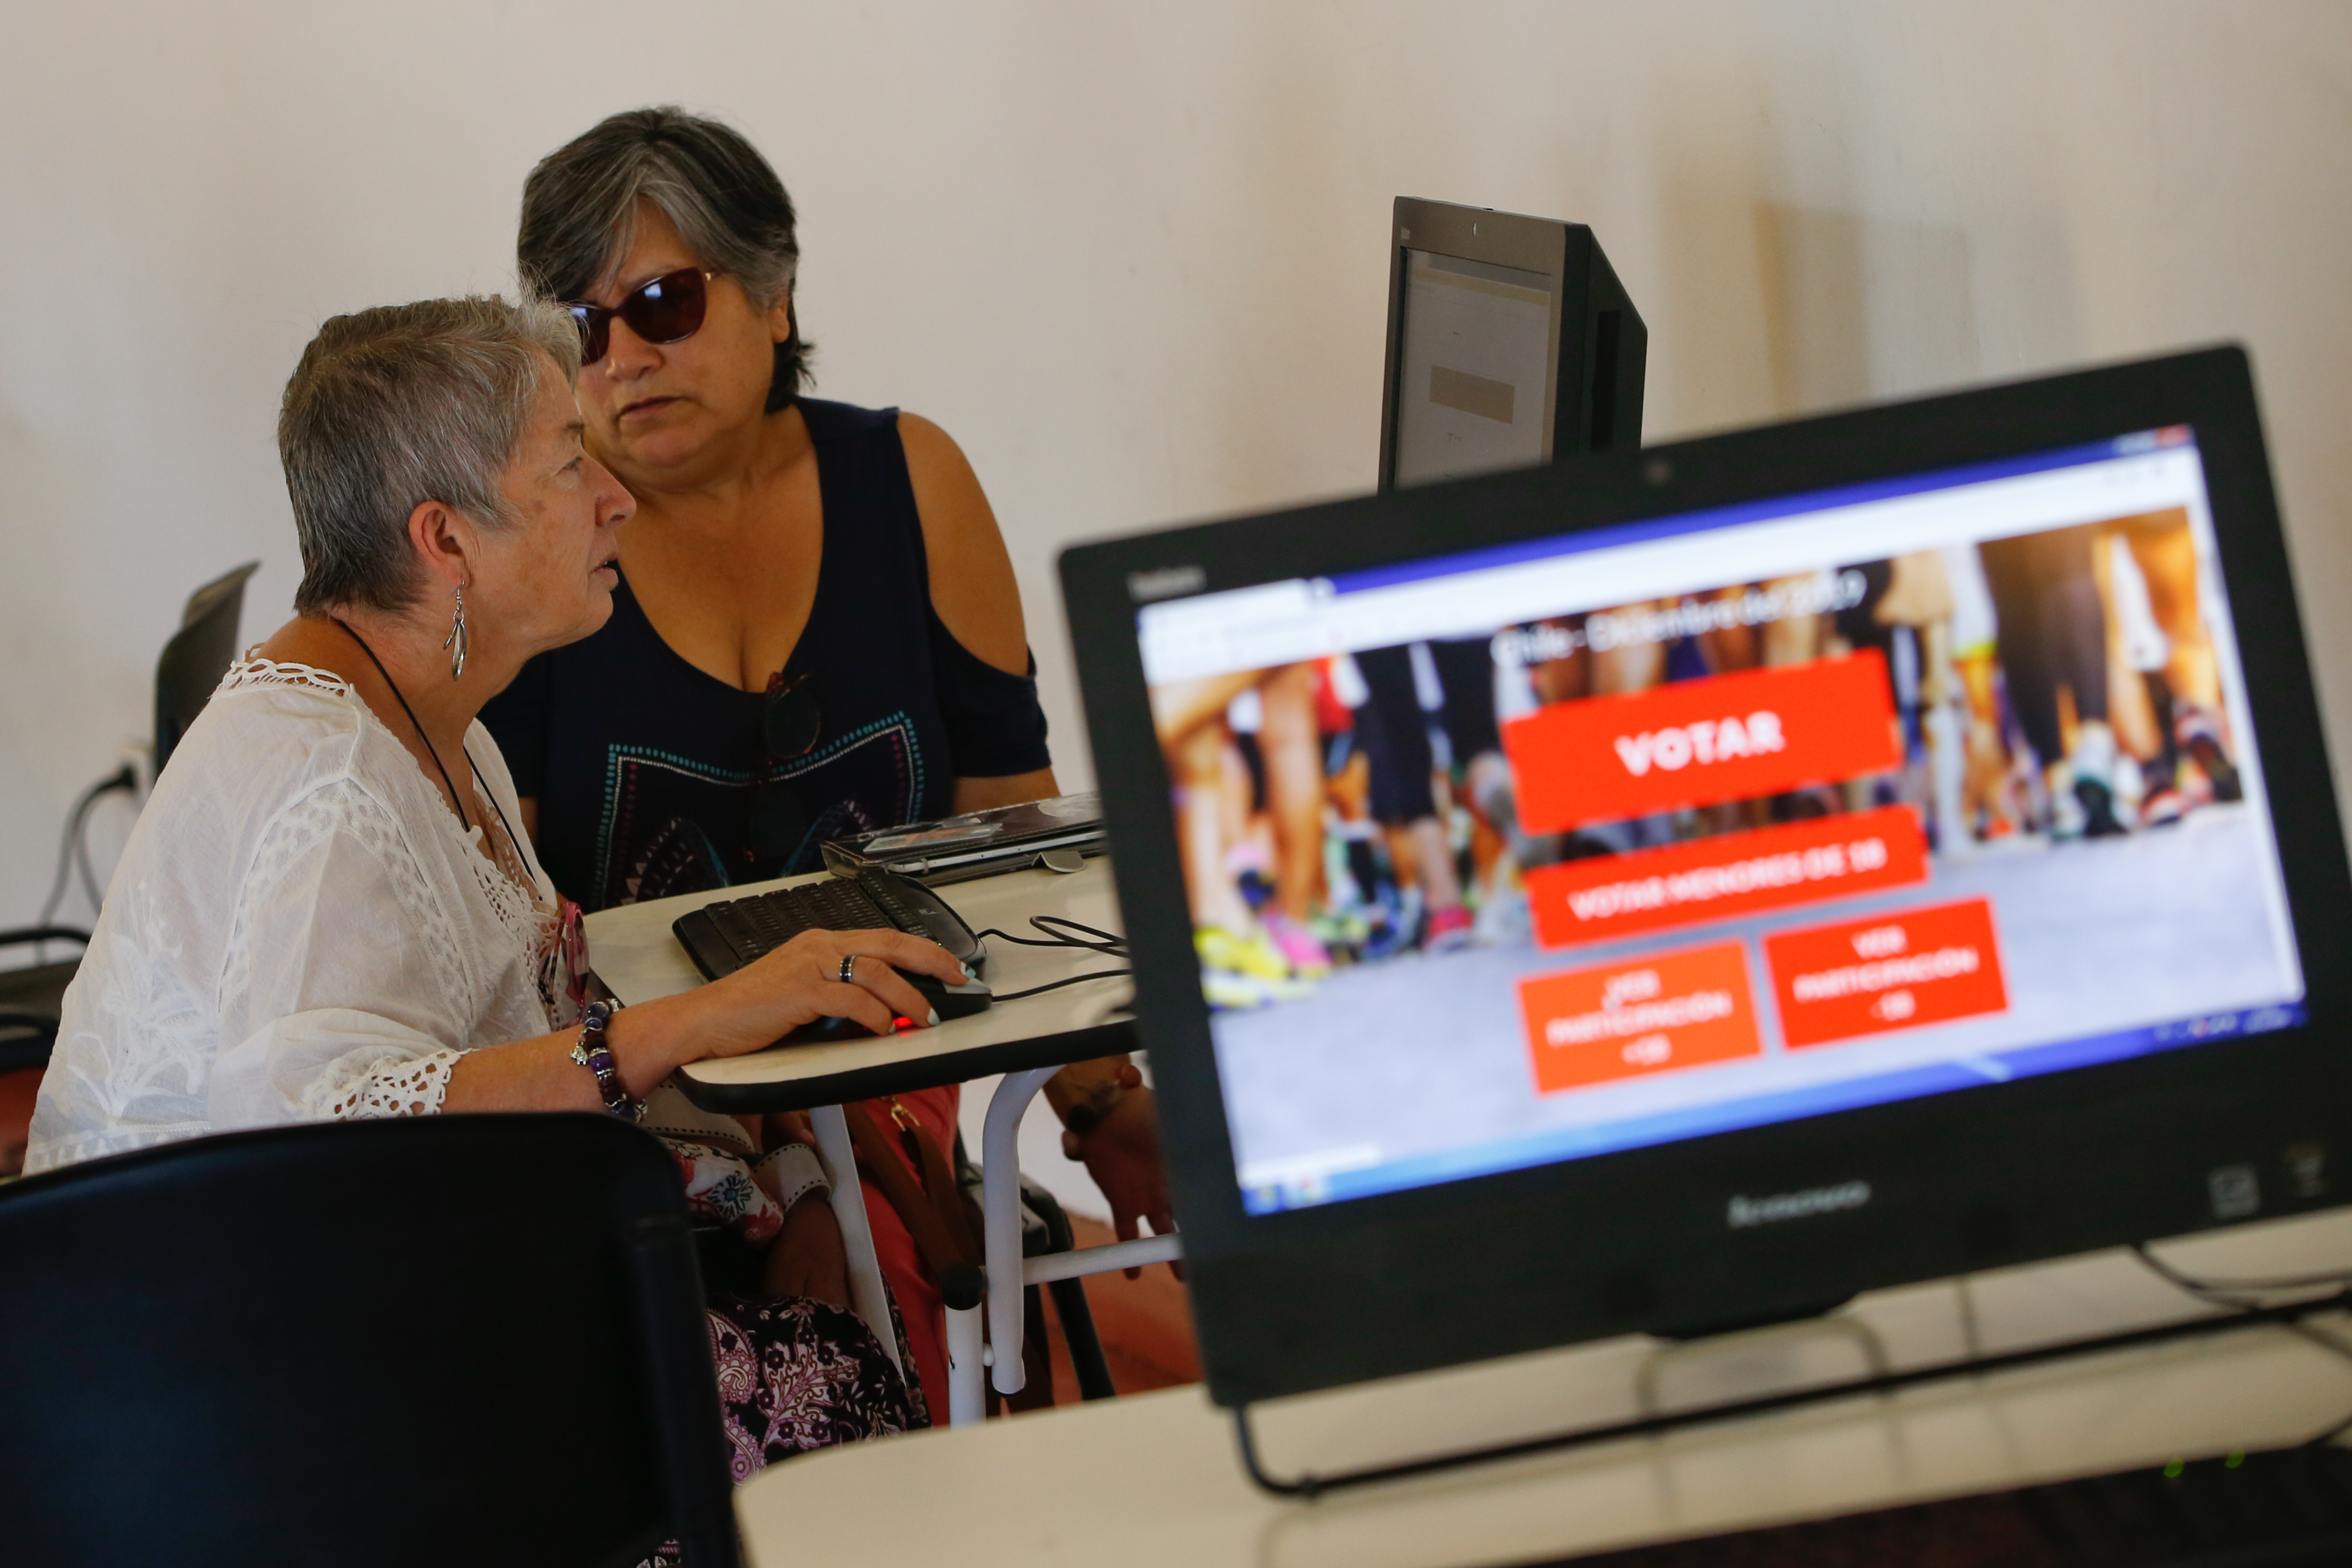 Two women voting electronically with computer screen showing the EVoting platform